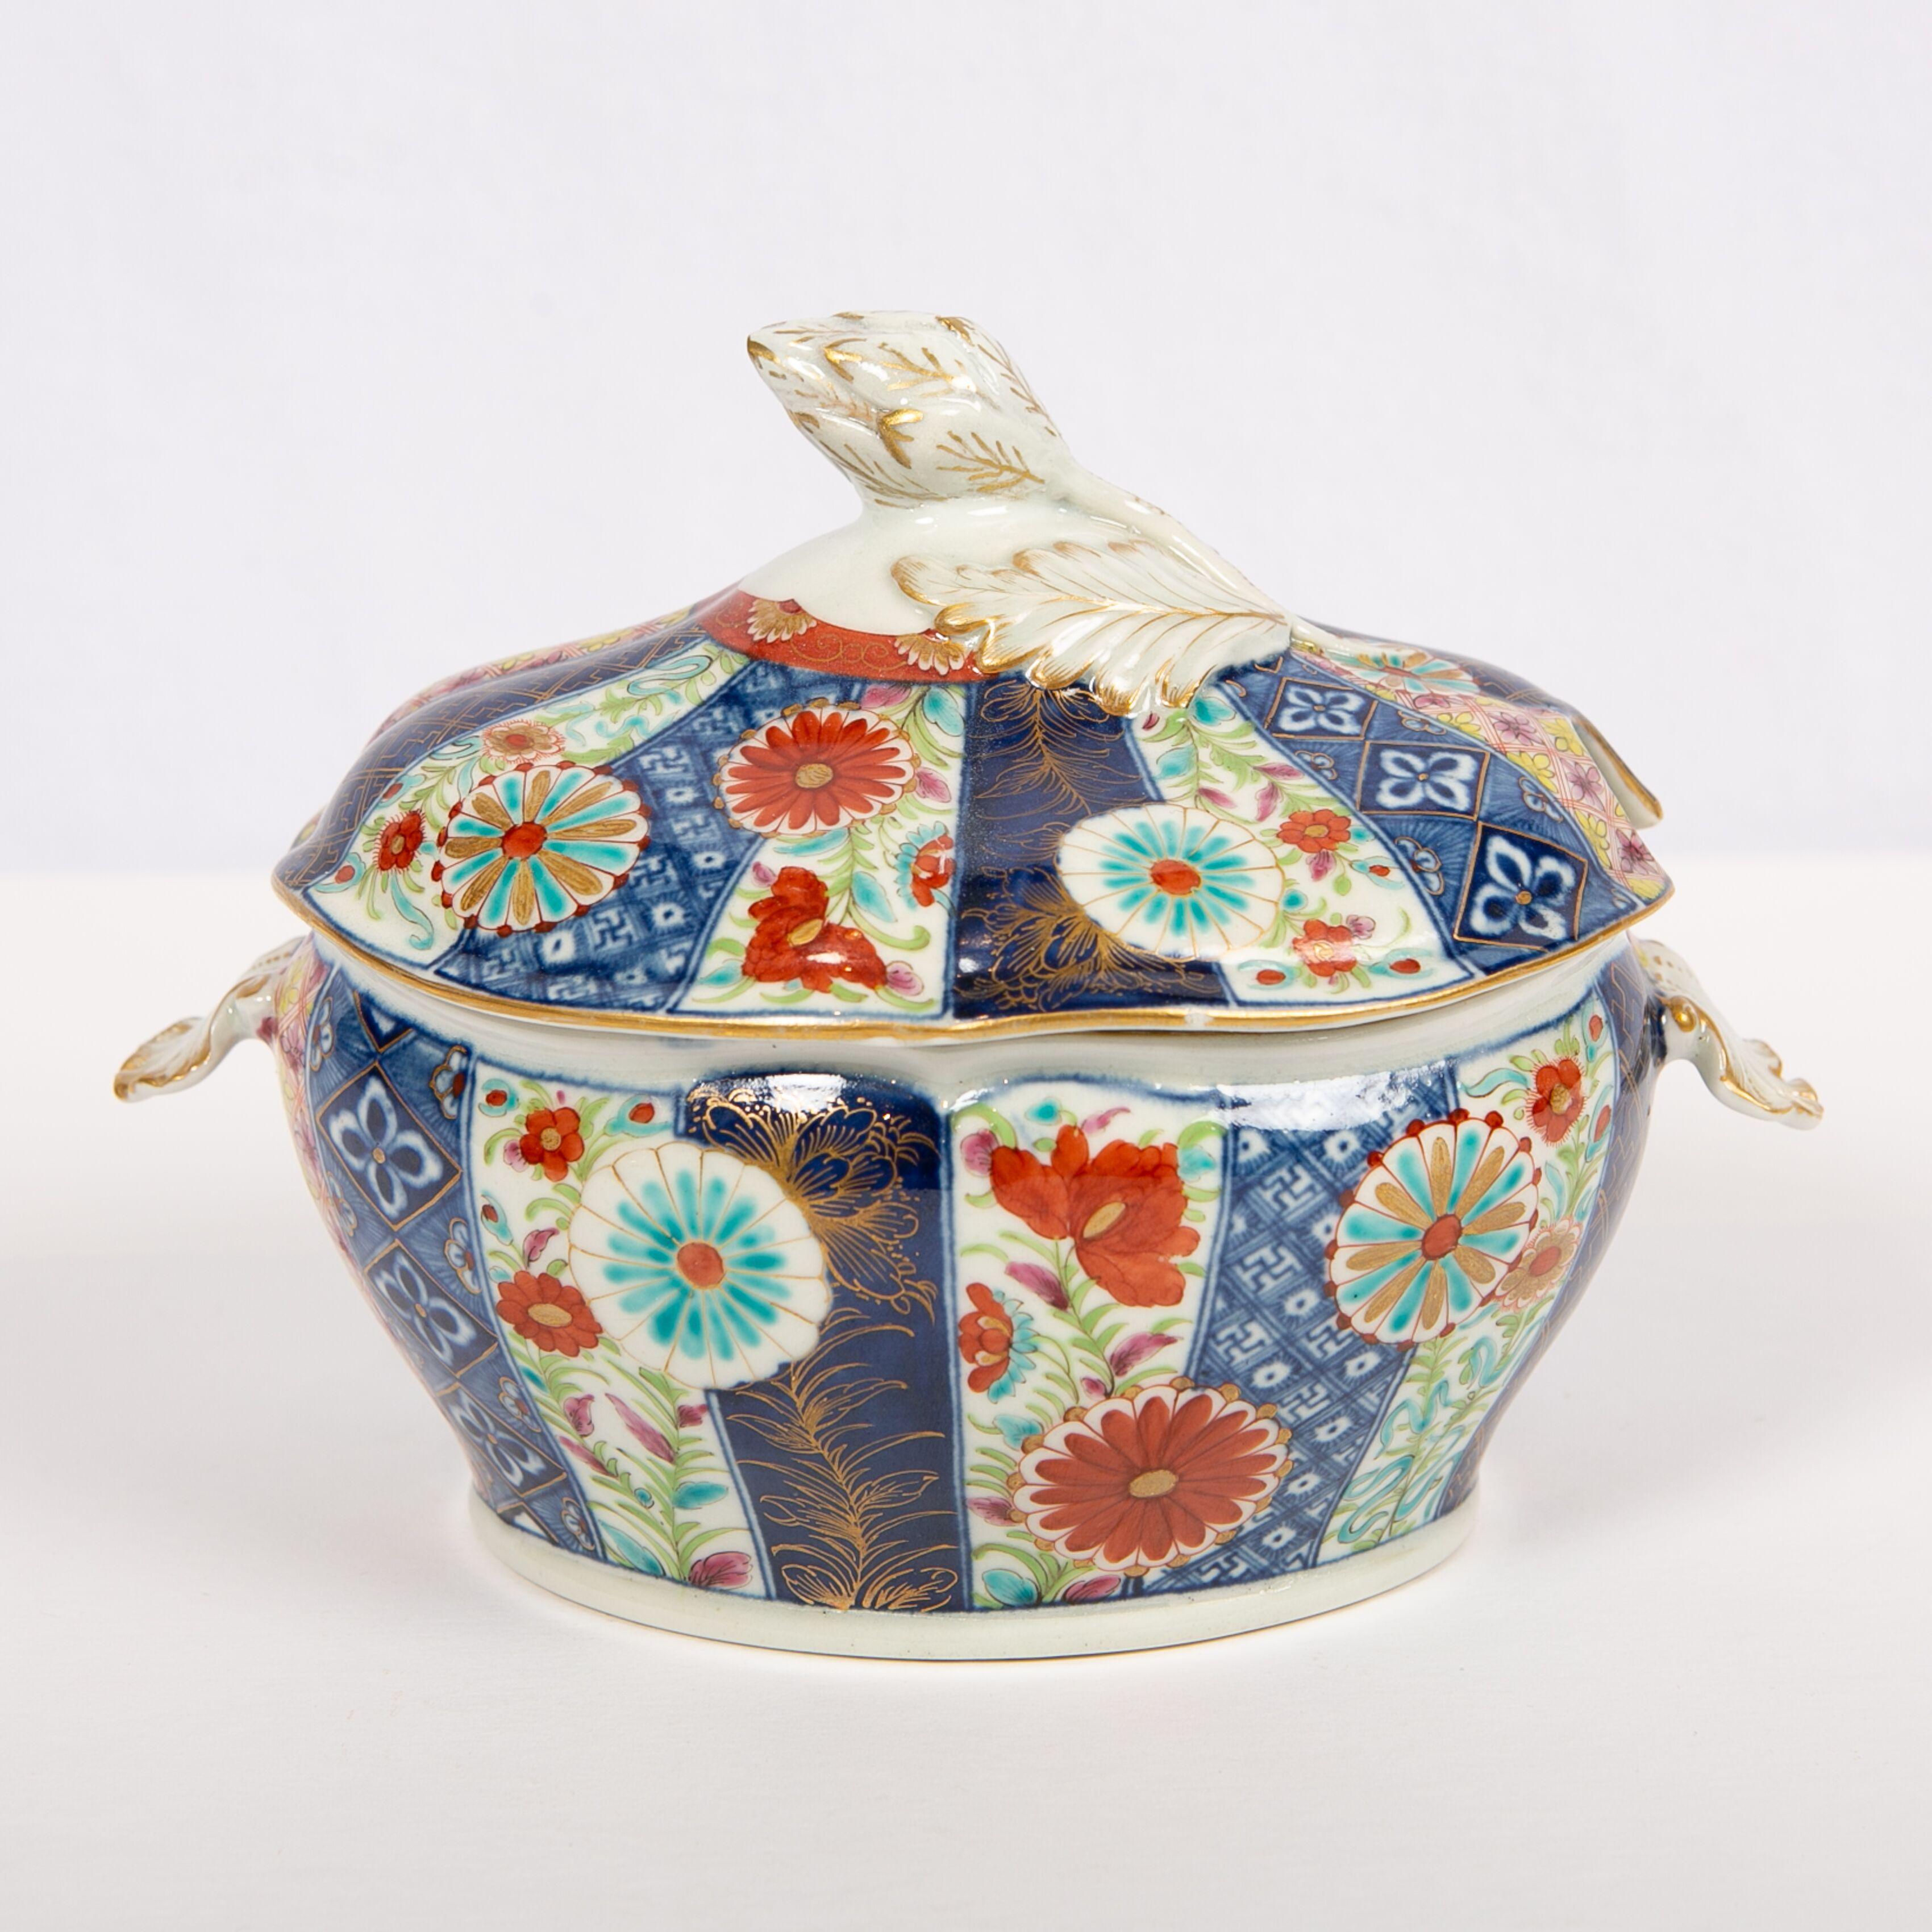 We are proud to offer this beautiful 18th century Mosaic pattern Worcester sauce tureen, cover, and stand. Made in the First Period of Worcester Porcelain, circa 1765, it is hand painted in an ornate Imari inspired pattern. The design shows sixteen